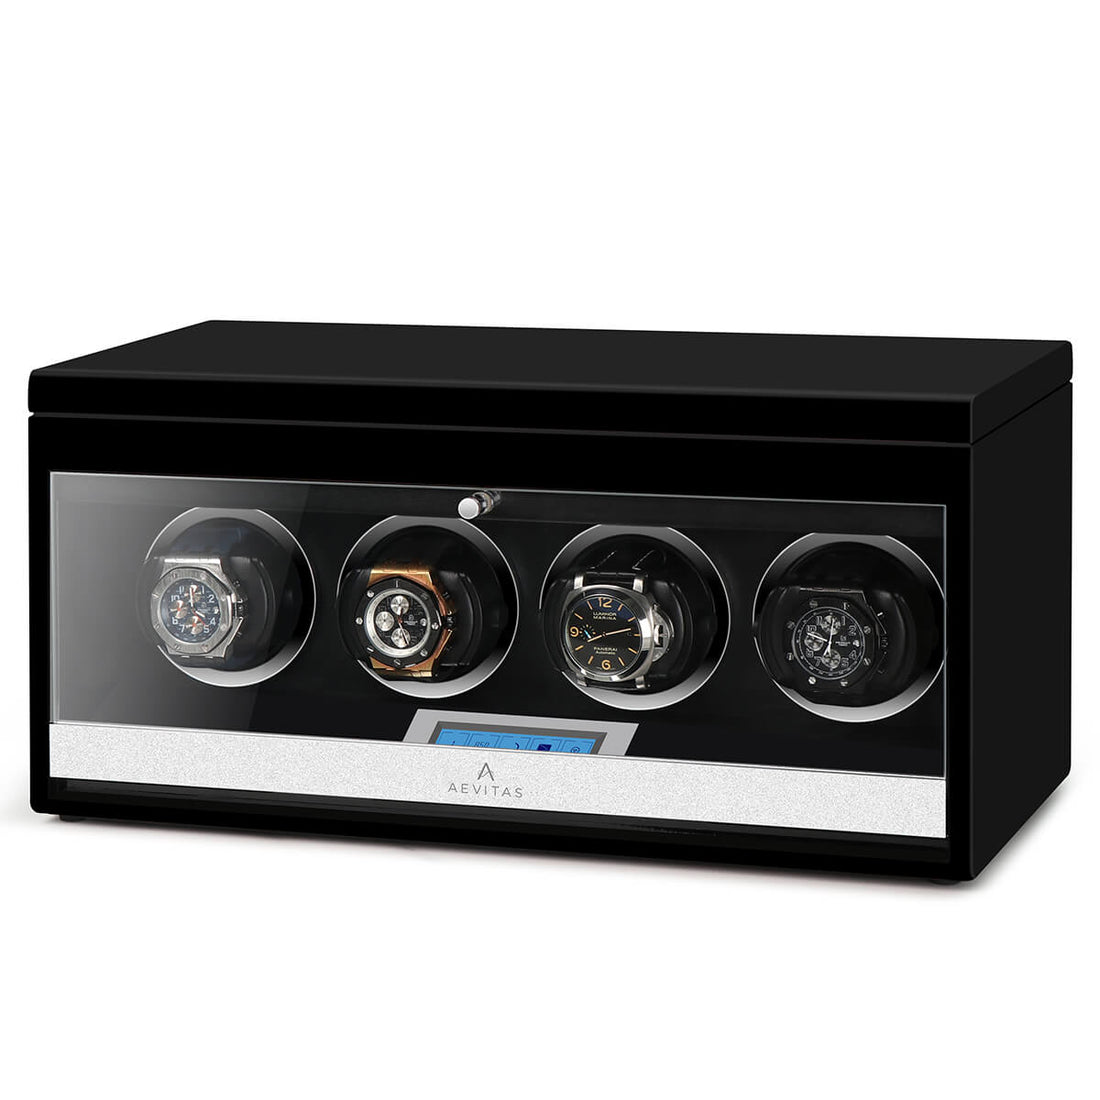 Choosing the Right Aevitas Watch Winder for Your Watch Collection